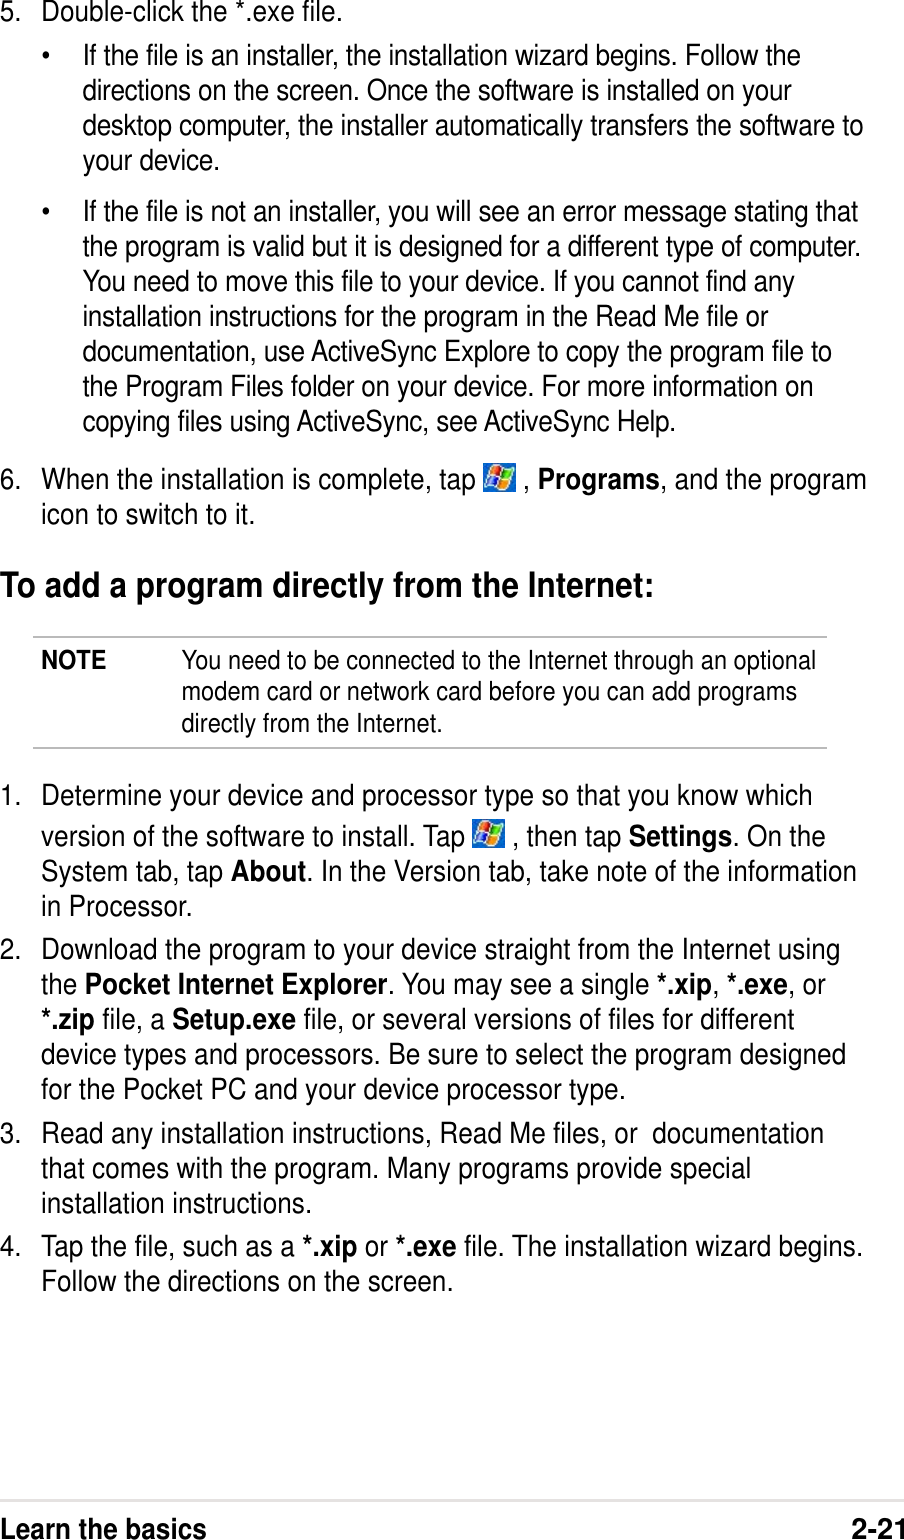 Learn the basics2-215. Double-click the *.exe file.•If the file is an installer, the installation wizard begins. Follow thedirections on the screen. Once the software is installed on yourdesktop computer, the installer automatically transfers the software toyour device.•If the file is not an installer, you will see an error message stating thatthe program is valid but it is designed for a different type of computer.You need to move this file to your device. If you cannot find anyinstallation instructions for the program in the Read Me file ordocumentation, use ActiveSync Explore to copy the program file tothe Program Files folder on your device. For more information oncopying files using ActiveSync, see ActiveSync Help.6. When the installation is complete, tap   , Programs, and the programicon to switch to it.To add a program directly from the Internet:NOTE You need to be connected to the Internet through an optionalmodem card or network card before you can add programsdirectly from the Internet.1. Determine your device and processor type so that you know whichversion of the software to install. Tap   , then tap Settings. On theSystem tab, tap About. In the Version tab, take note of the informationin Processor.2. Download the program to your device straight from the Internet usingthe Pocket Internet Explorer. You may see a single *.xip, *.exe, or*.zip file, a Setup.exe file, or several versions of files for differentdevice types and processors. Be sure to select the program designedfor the Pocket PC and your device processor type.3. Read any installation instructions, Read Me files, or  documentationthat comes with the program. Many programs provide specialinstallation instructions.4. Tap the file, such as a *.xip or *.exe file. The installation wizard begins.Follow the directions on the screen.